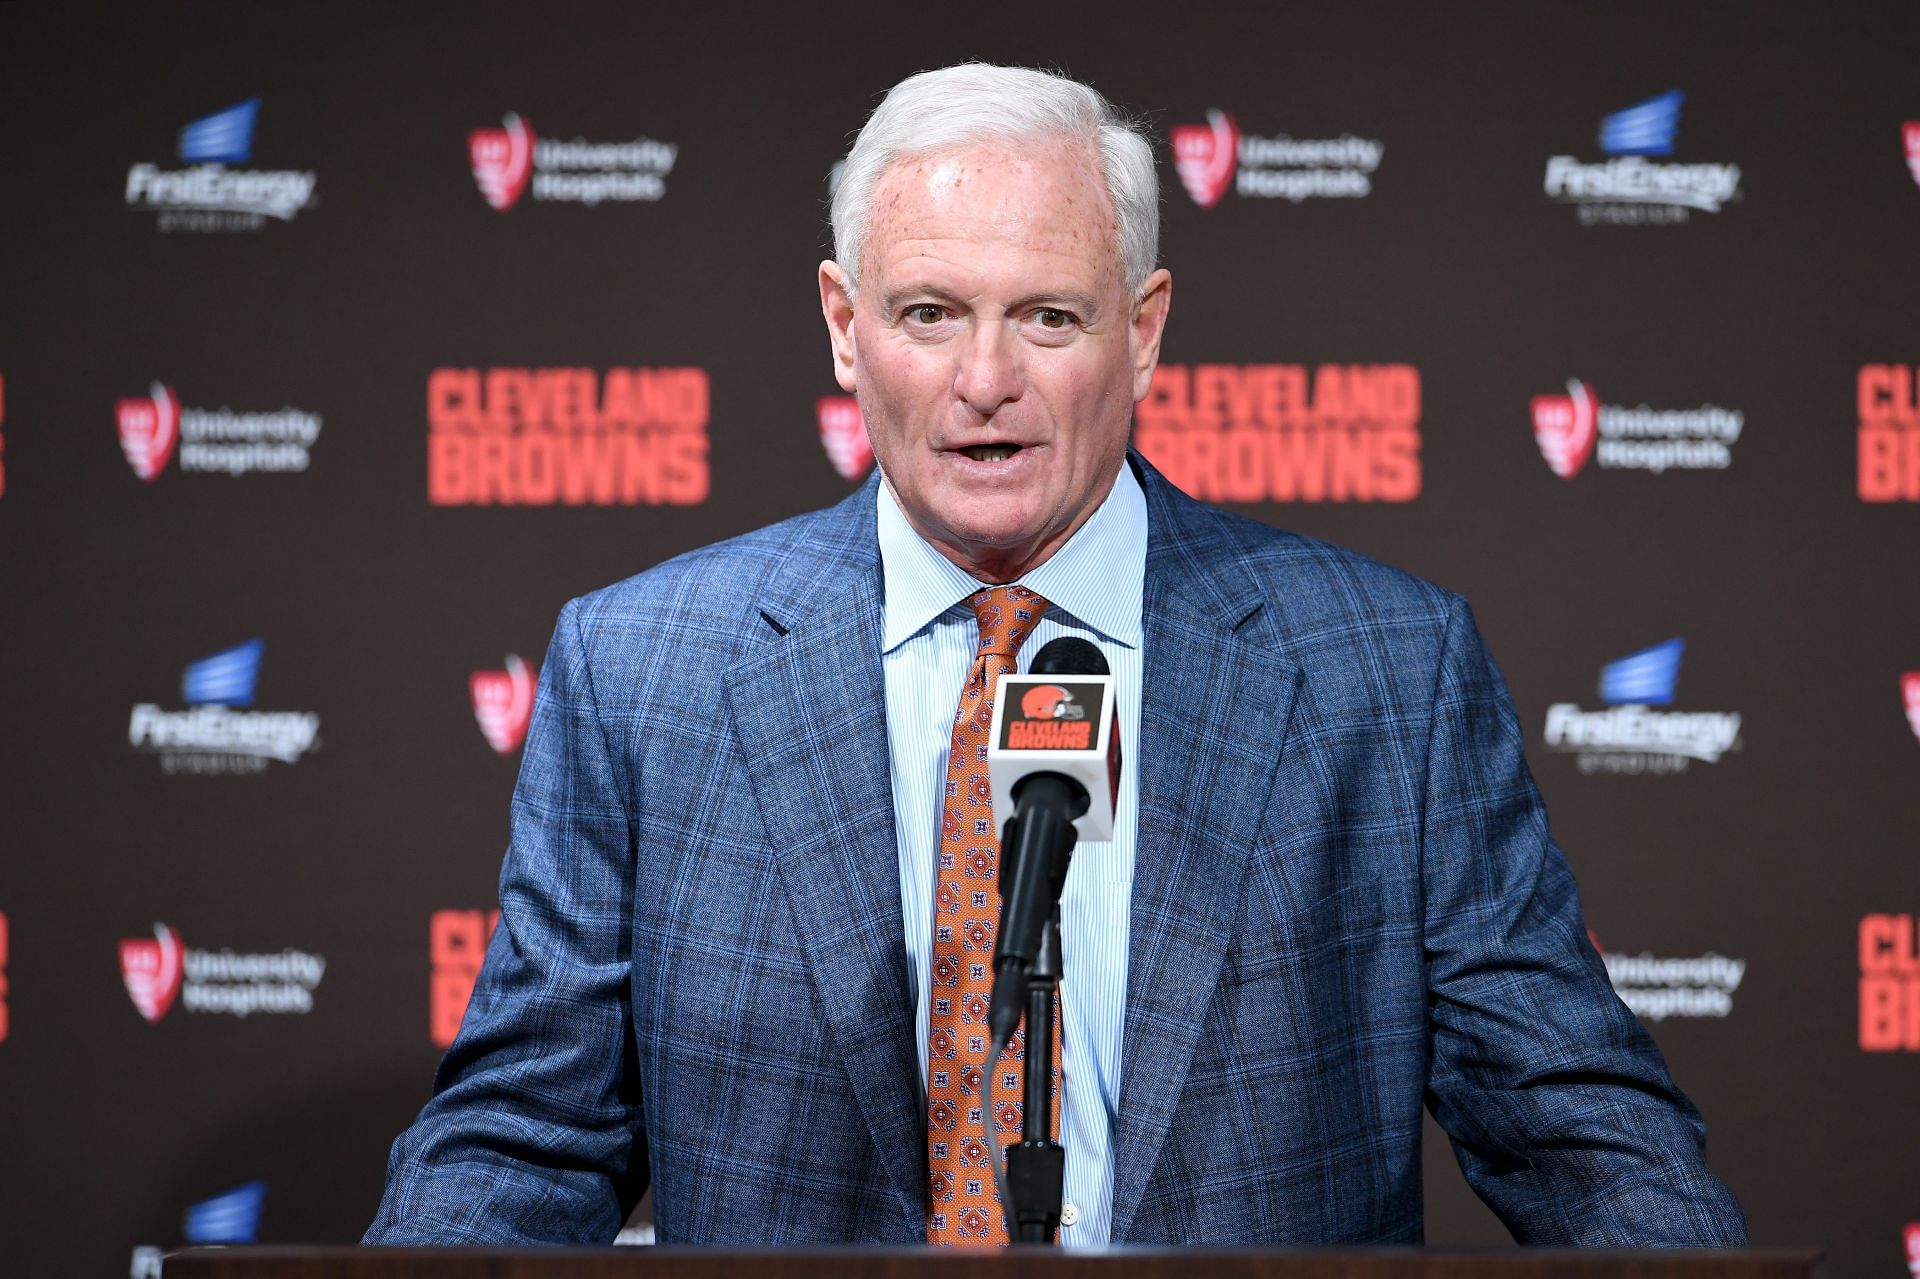 Cleveland Browns owner Jimmy Haslam.